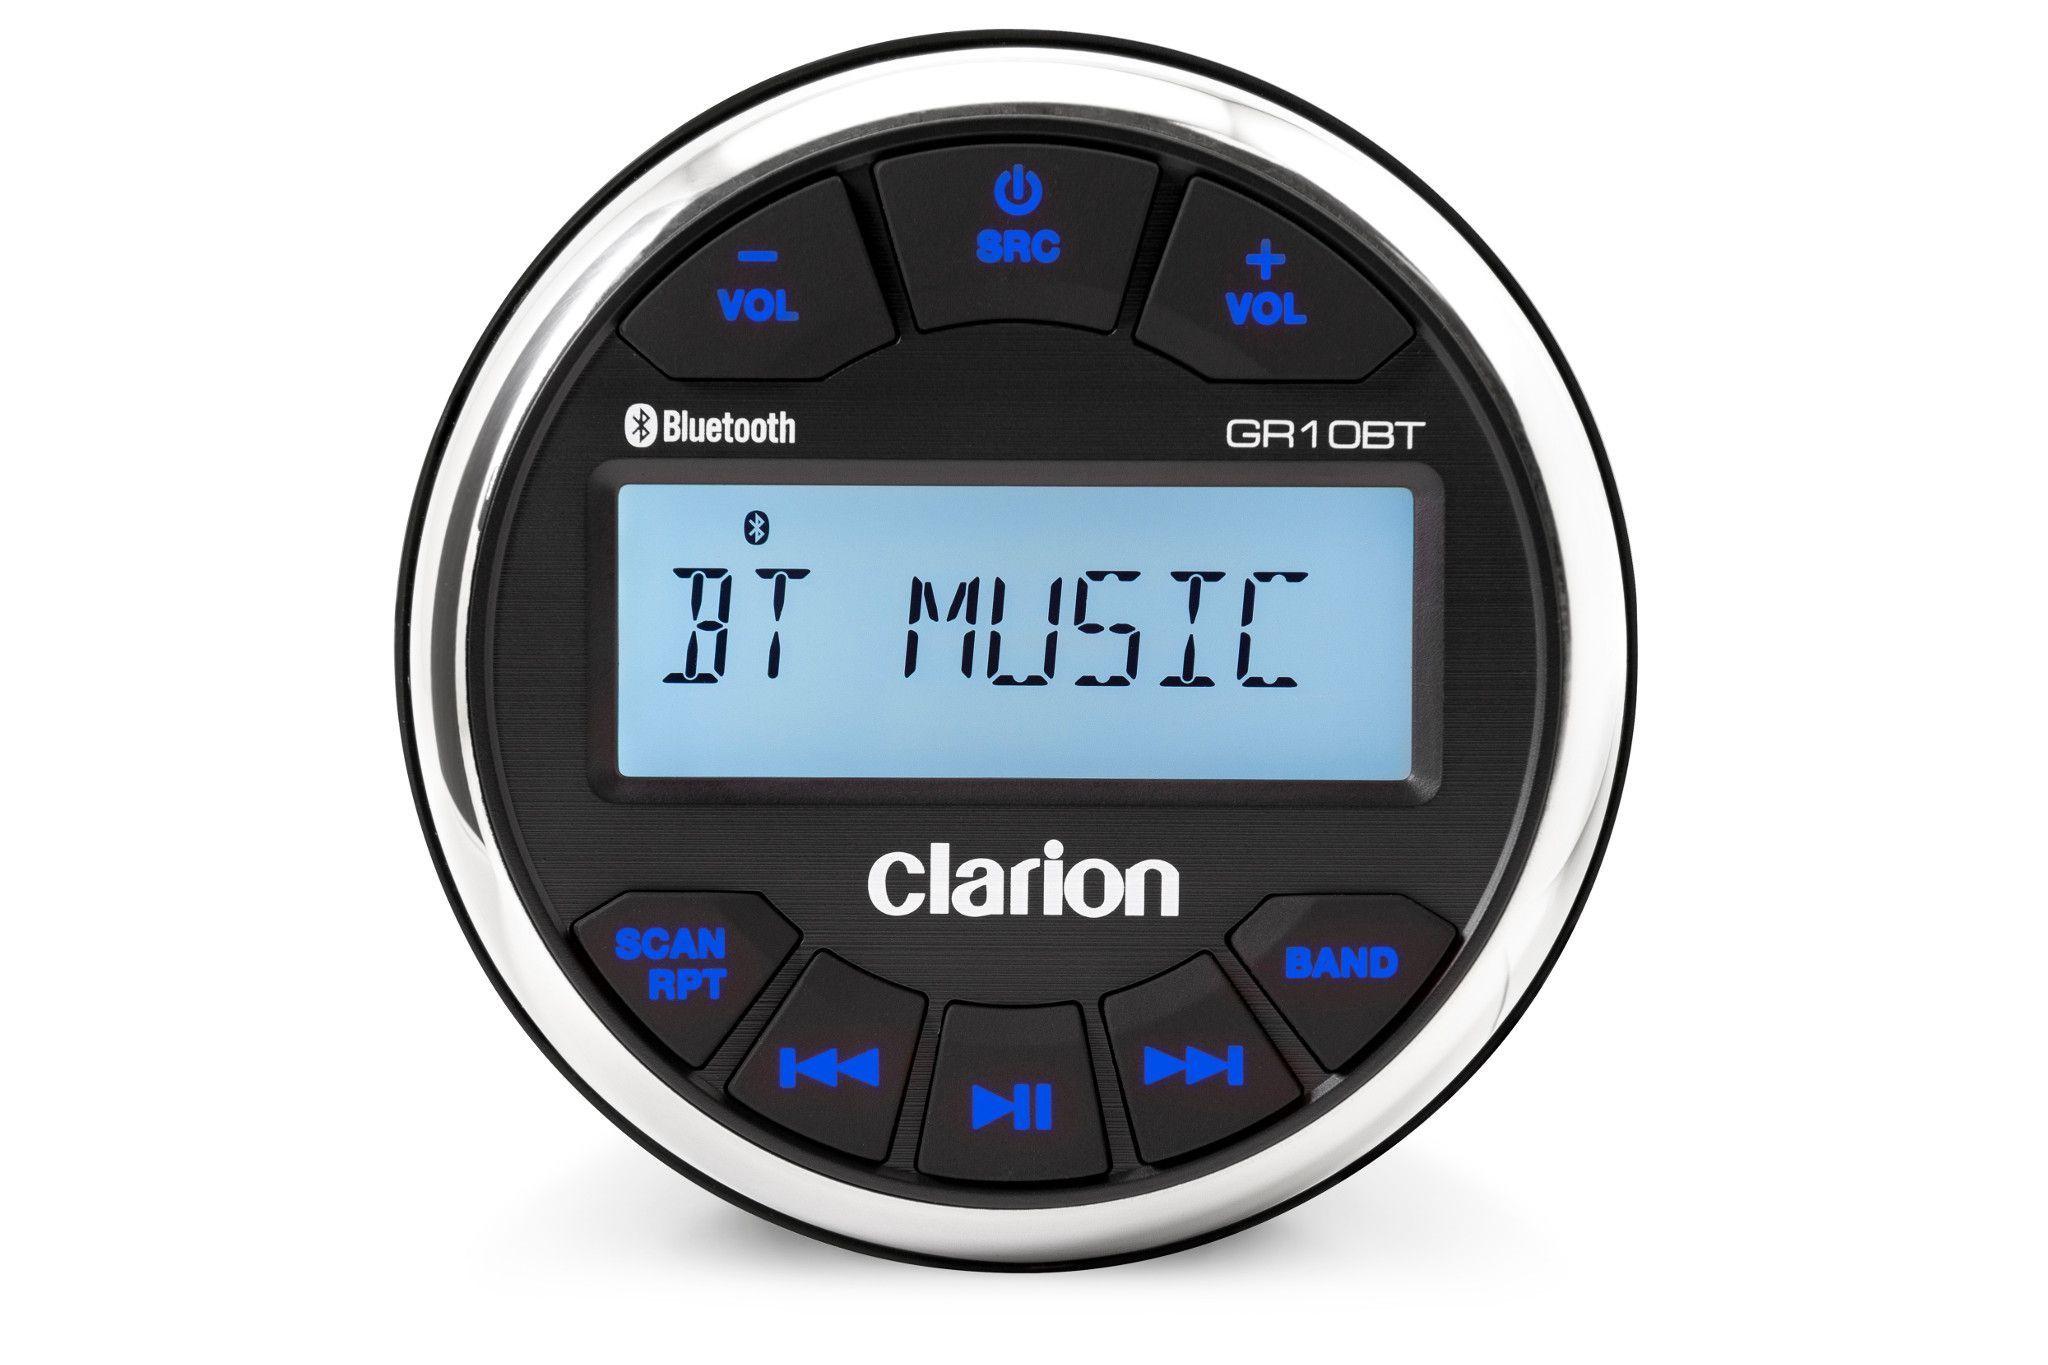 CLARION Digital Media Receiver. Installs into 3-inch Marine Gauge Hole. Features: AM/FM/WB, Bluetooth, USB, Aux Input Water Resistant (IPX5 front, IPX3 rear) | 92710